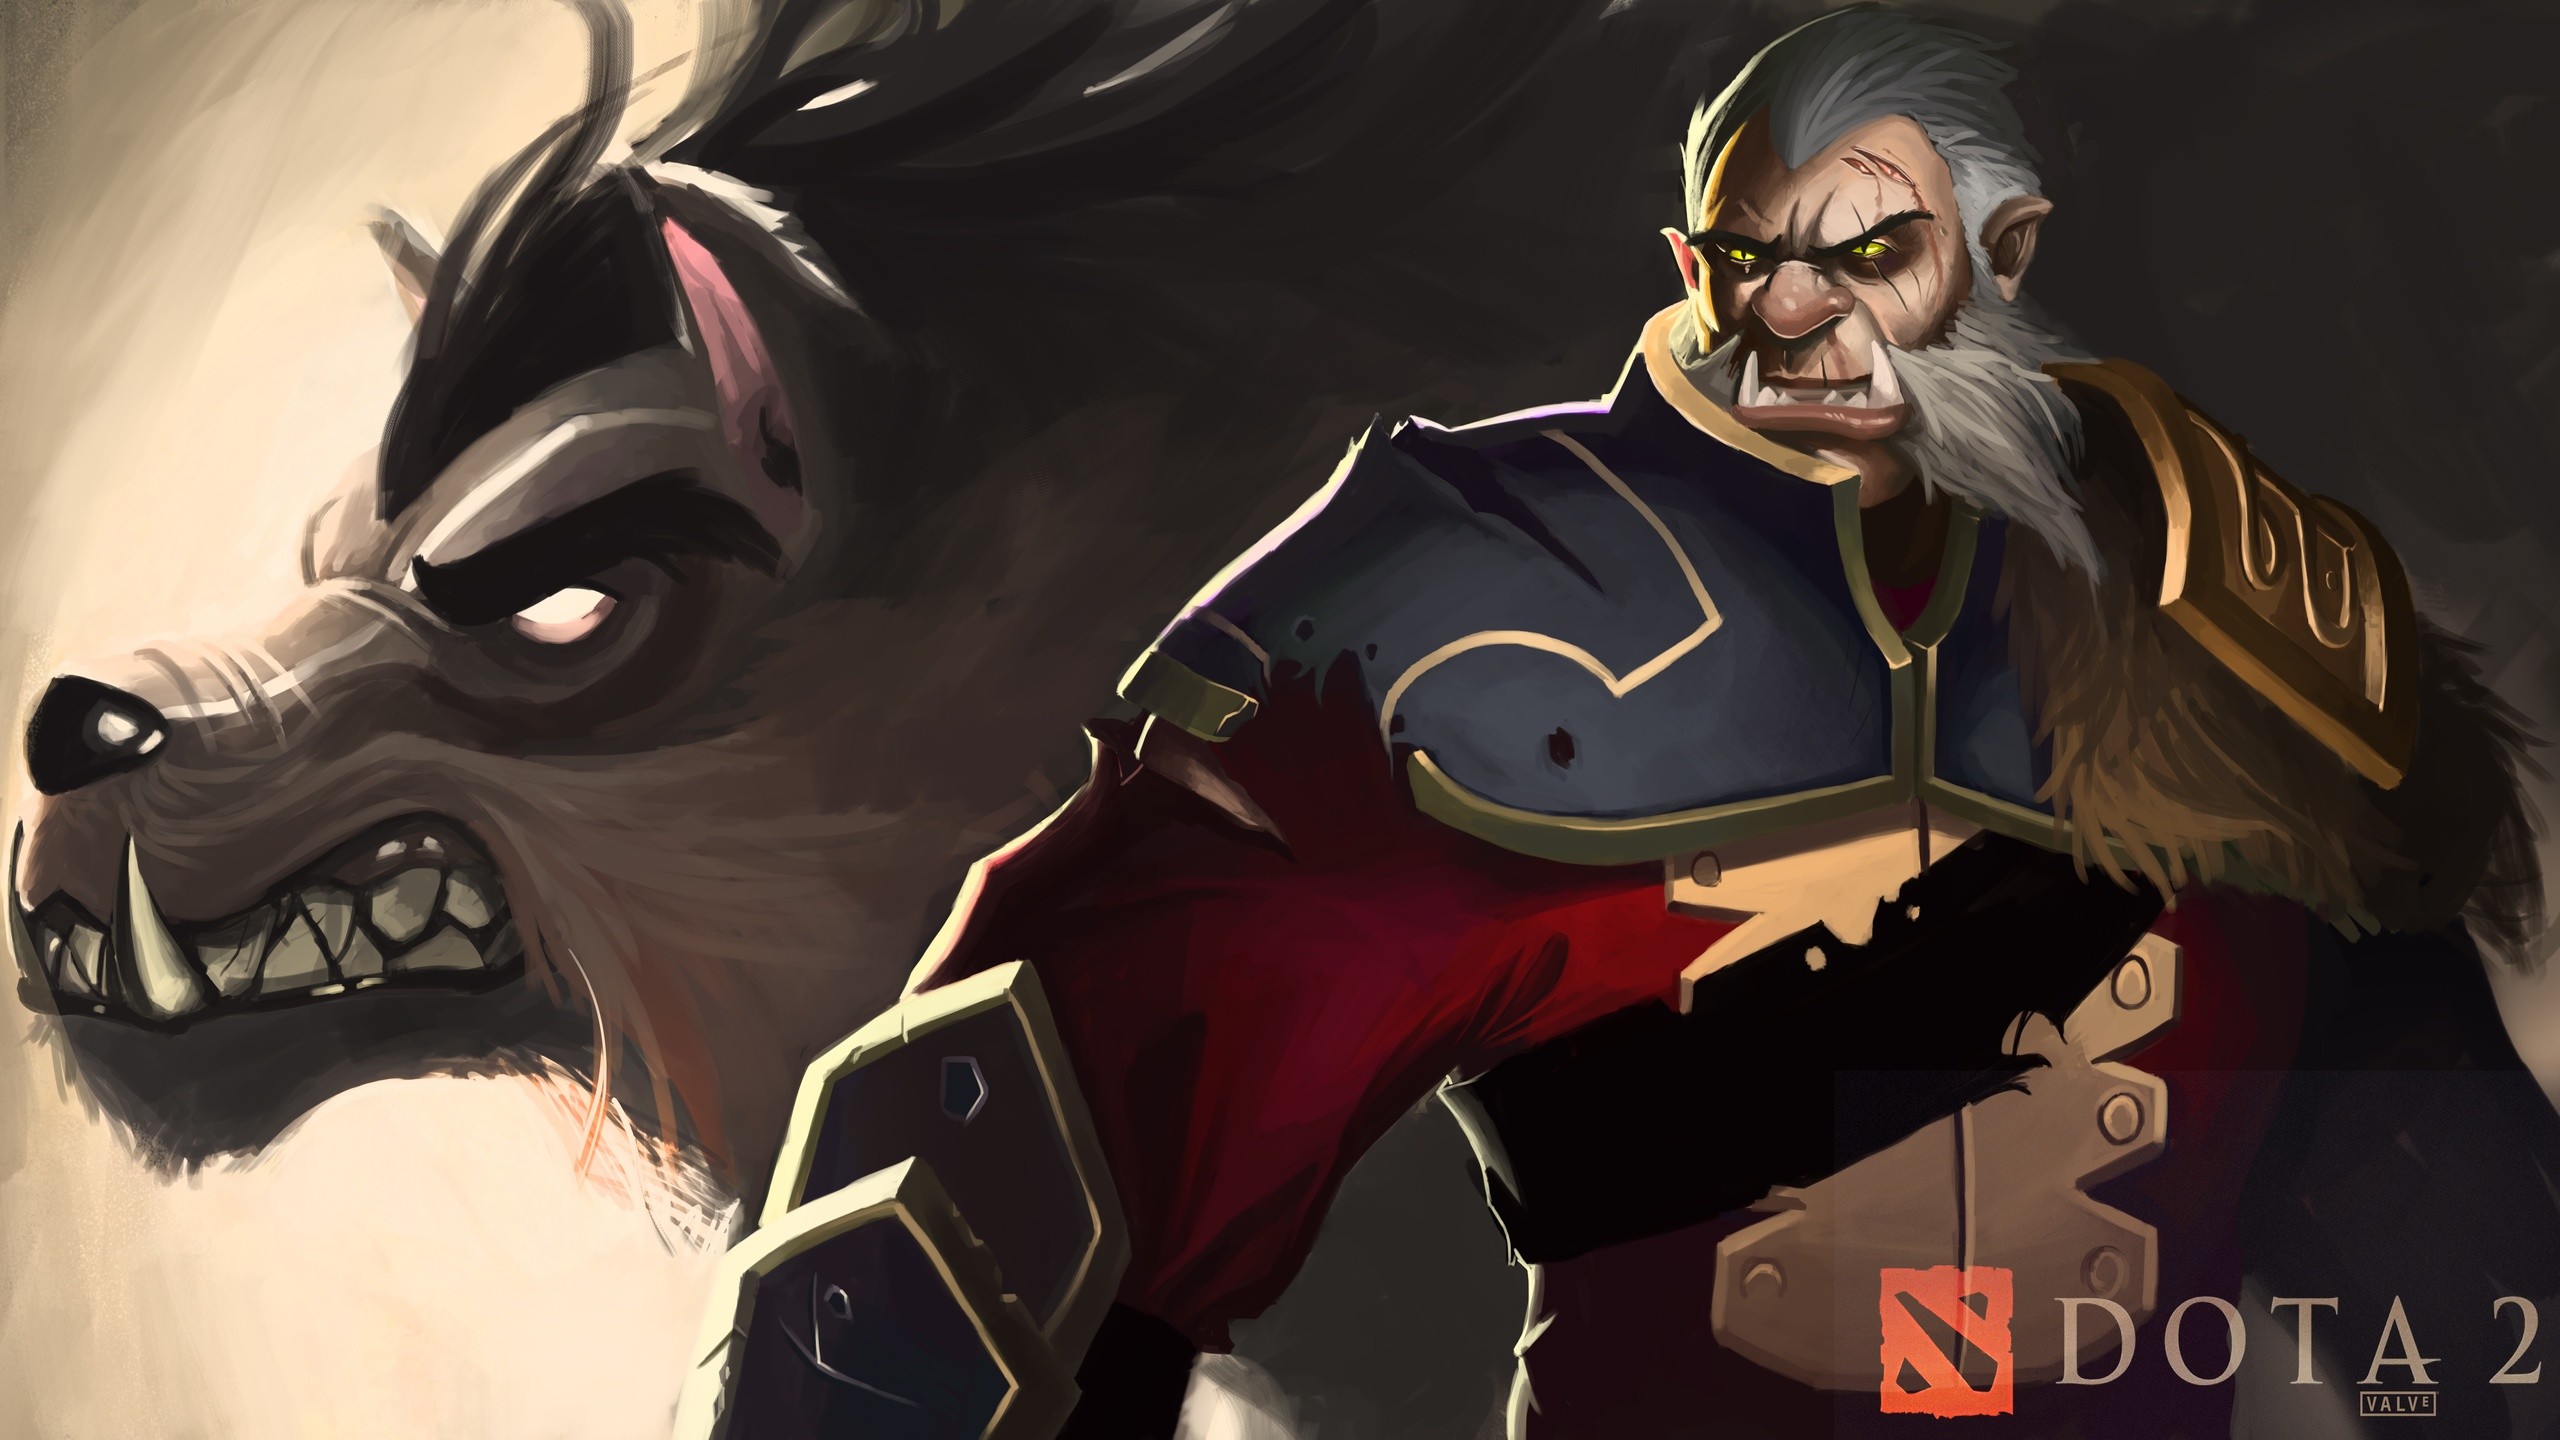 2560x1440 Search Results for “dota 2 lycanthrope wallpaper” – Adorable Wallpapers